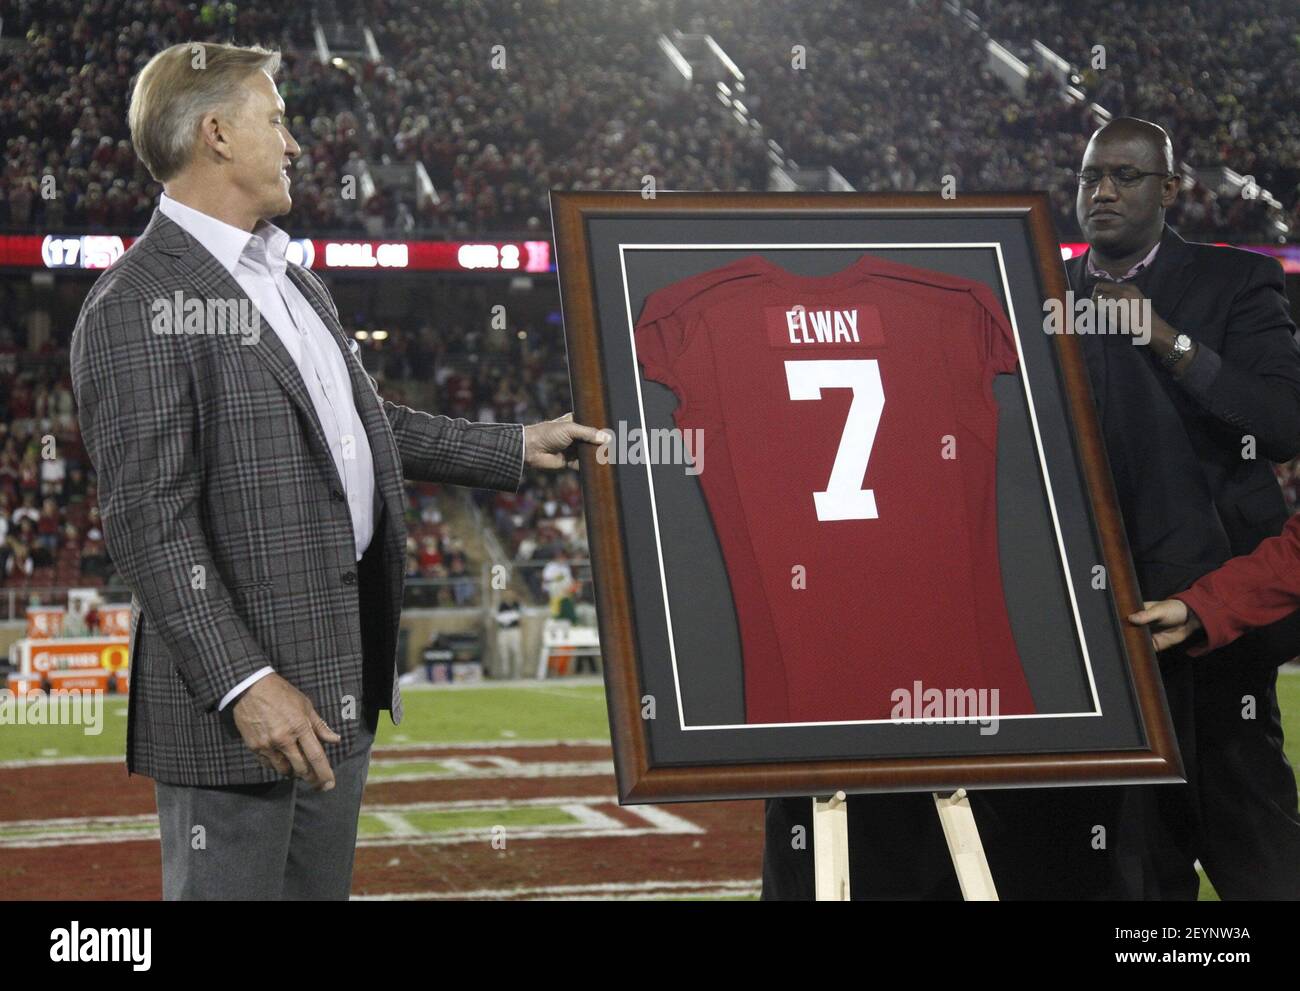 Stanford to retire John Elway's No. 7 at halftime of Oregon game 